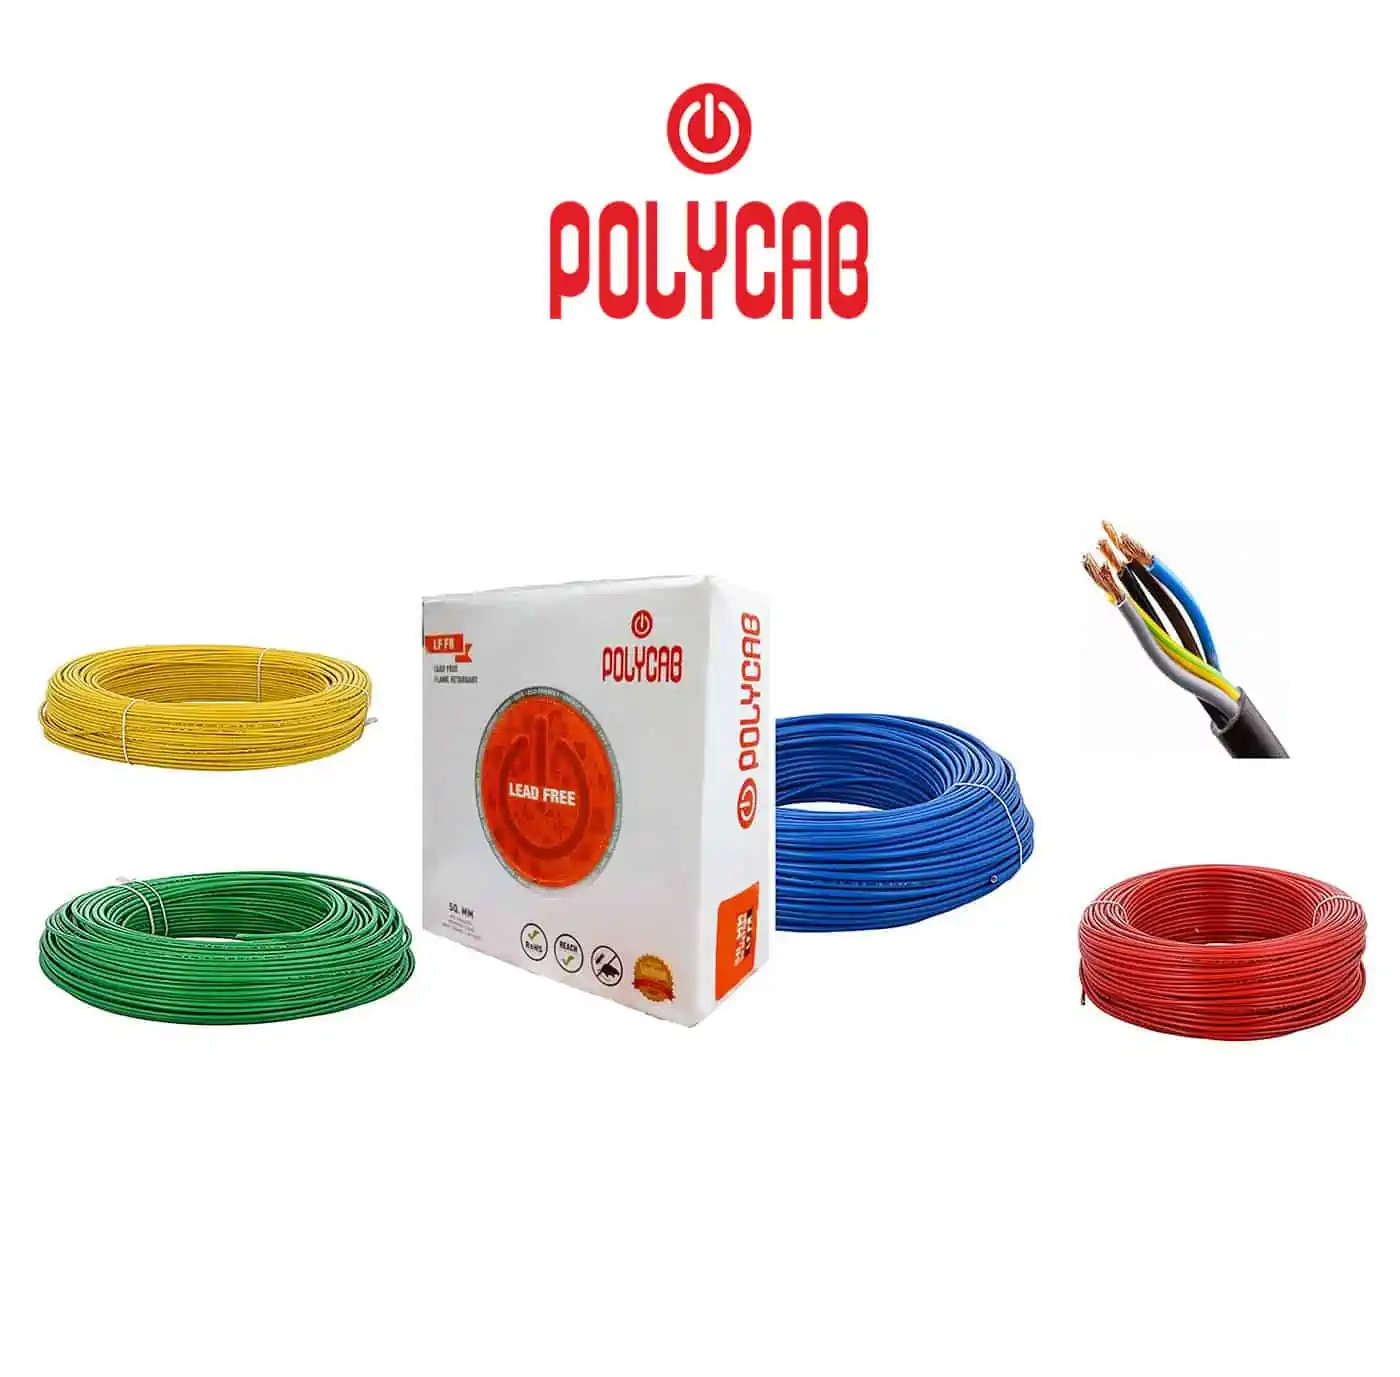 polycan pvc wires in different colours